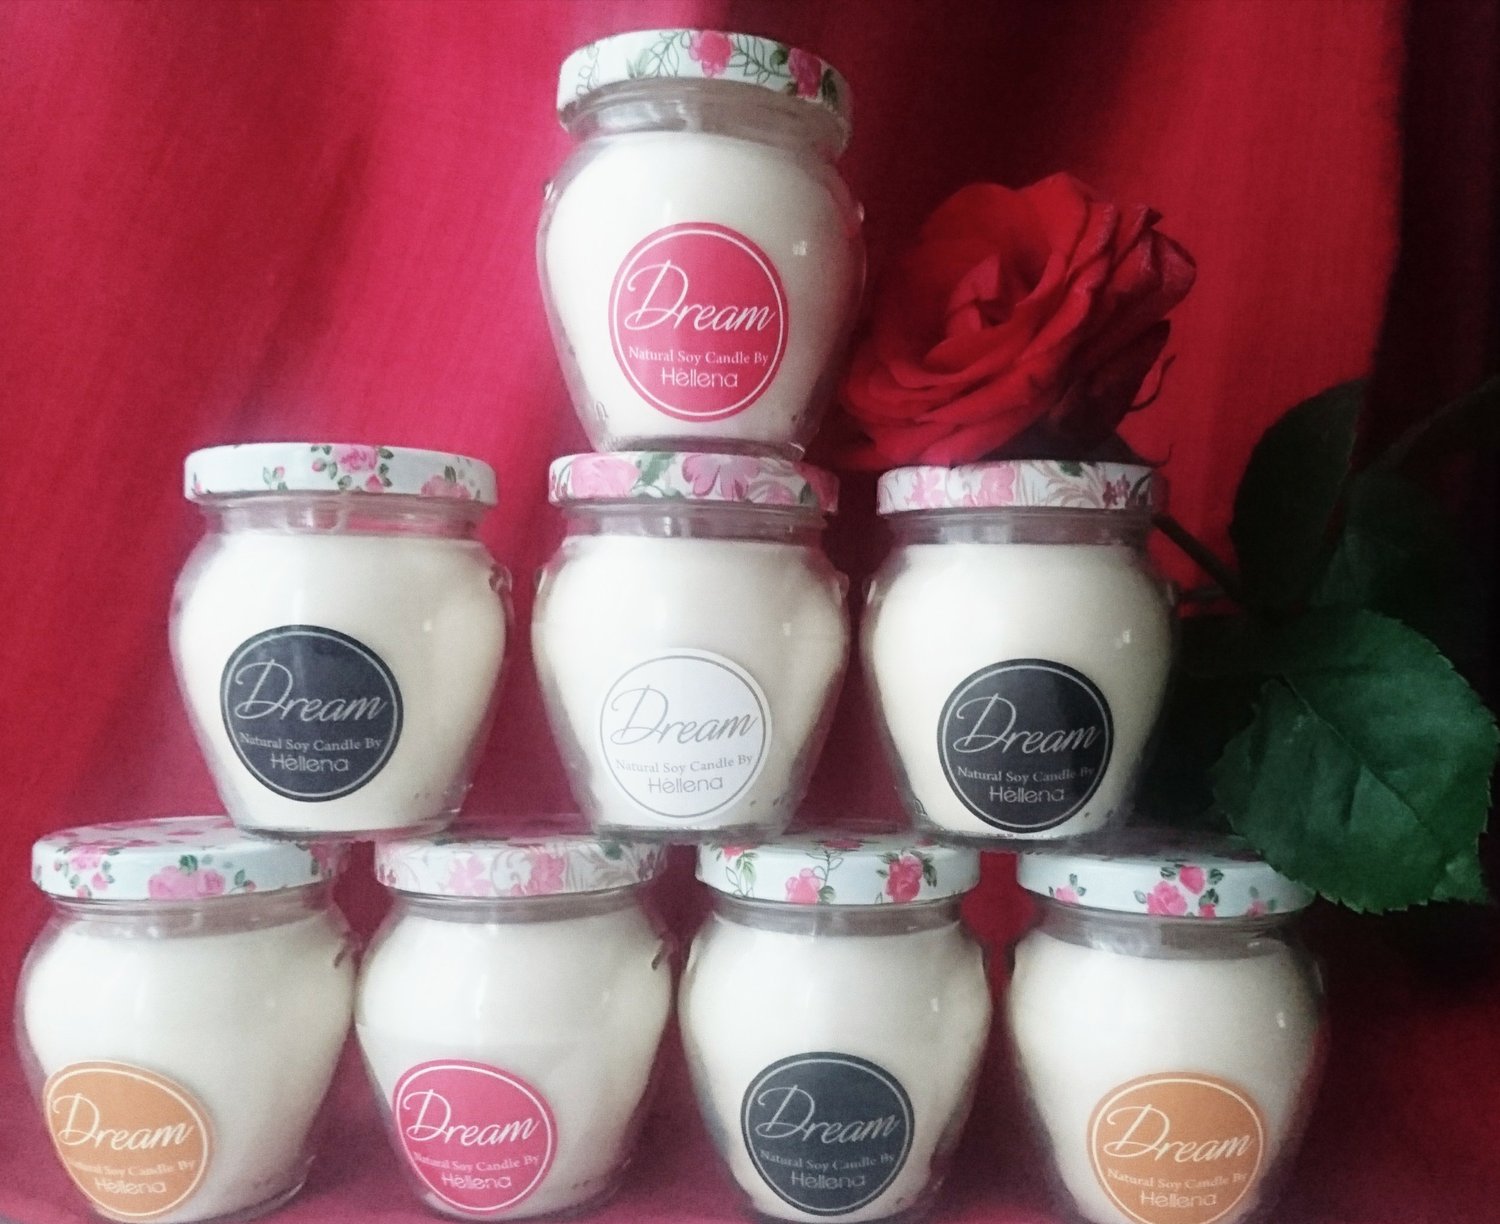 Image of Homemade "Dream" Candles by Héllena